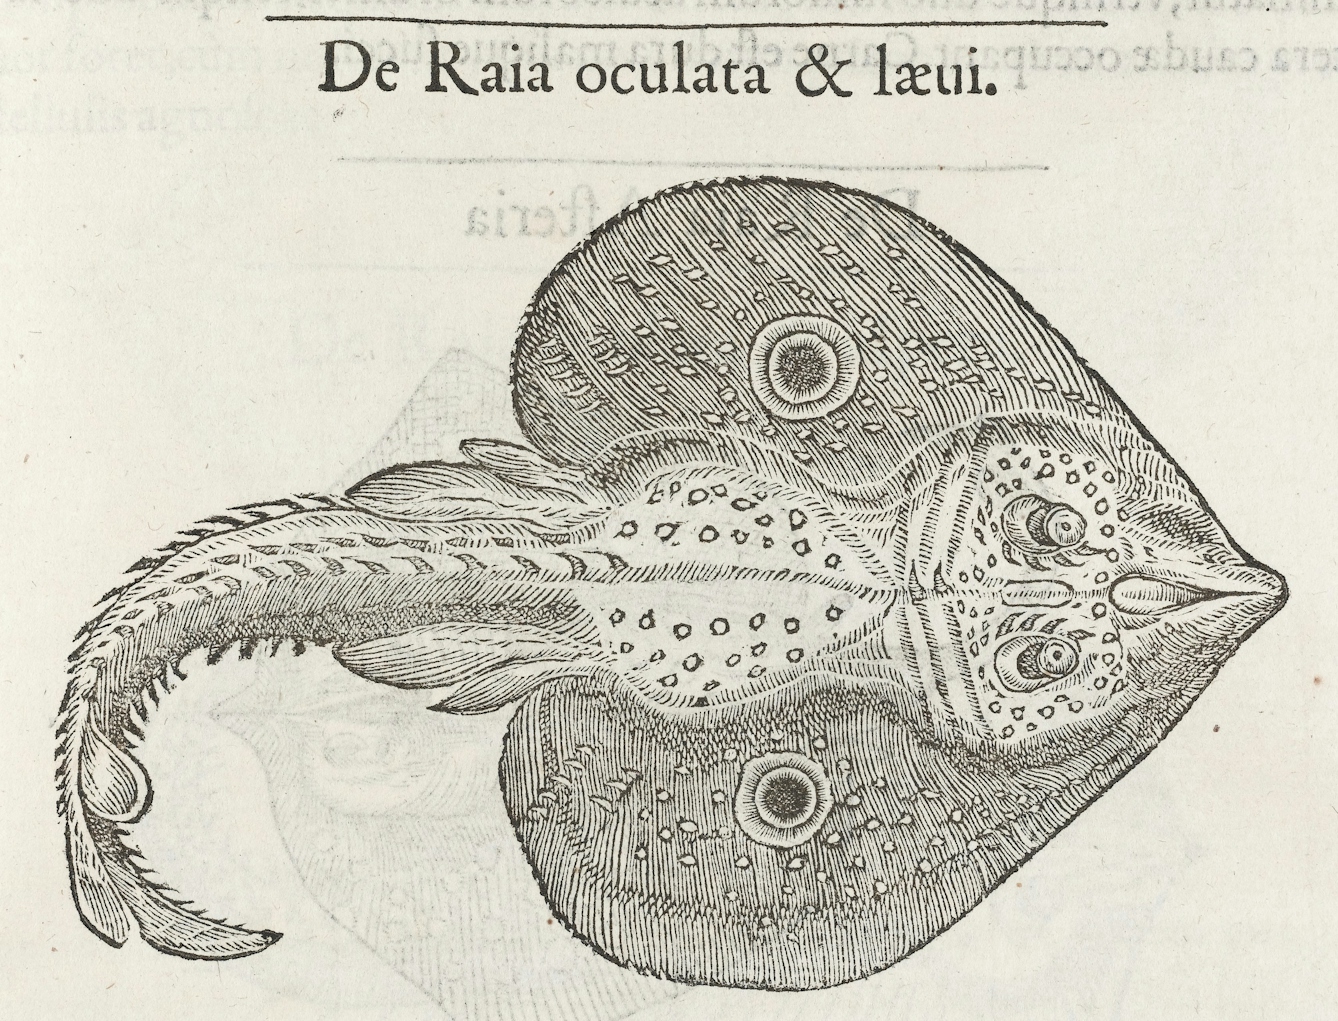 Guillaume Rondelet, a 16th century naturalist, had observed the torpedo’s stupefying faculty in this study of marine life.